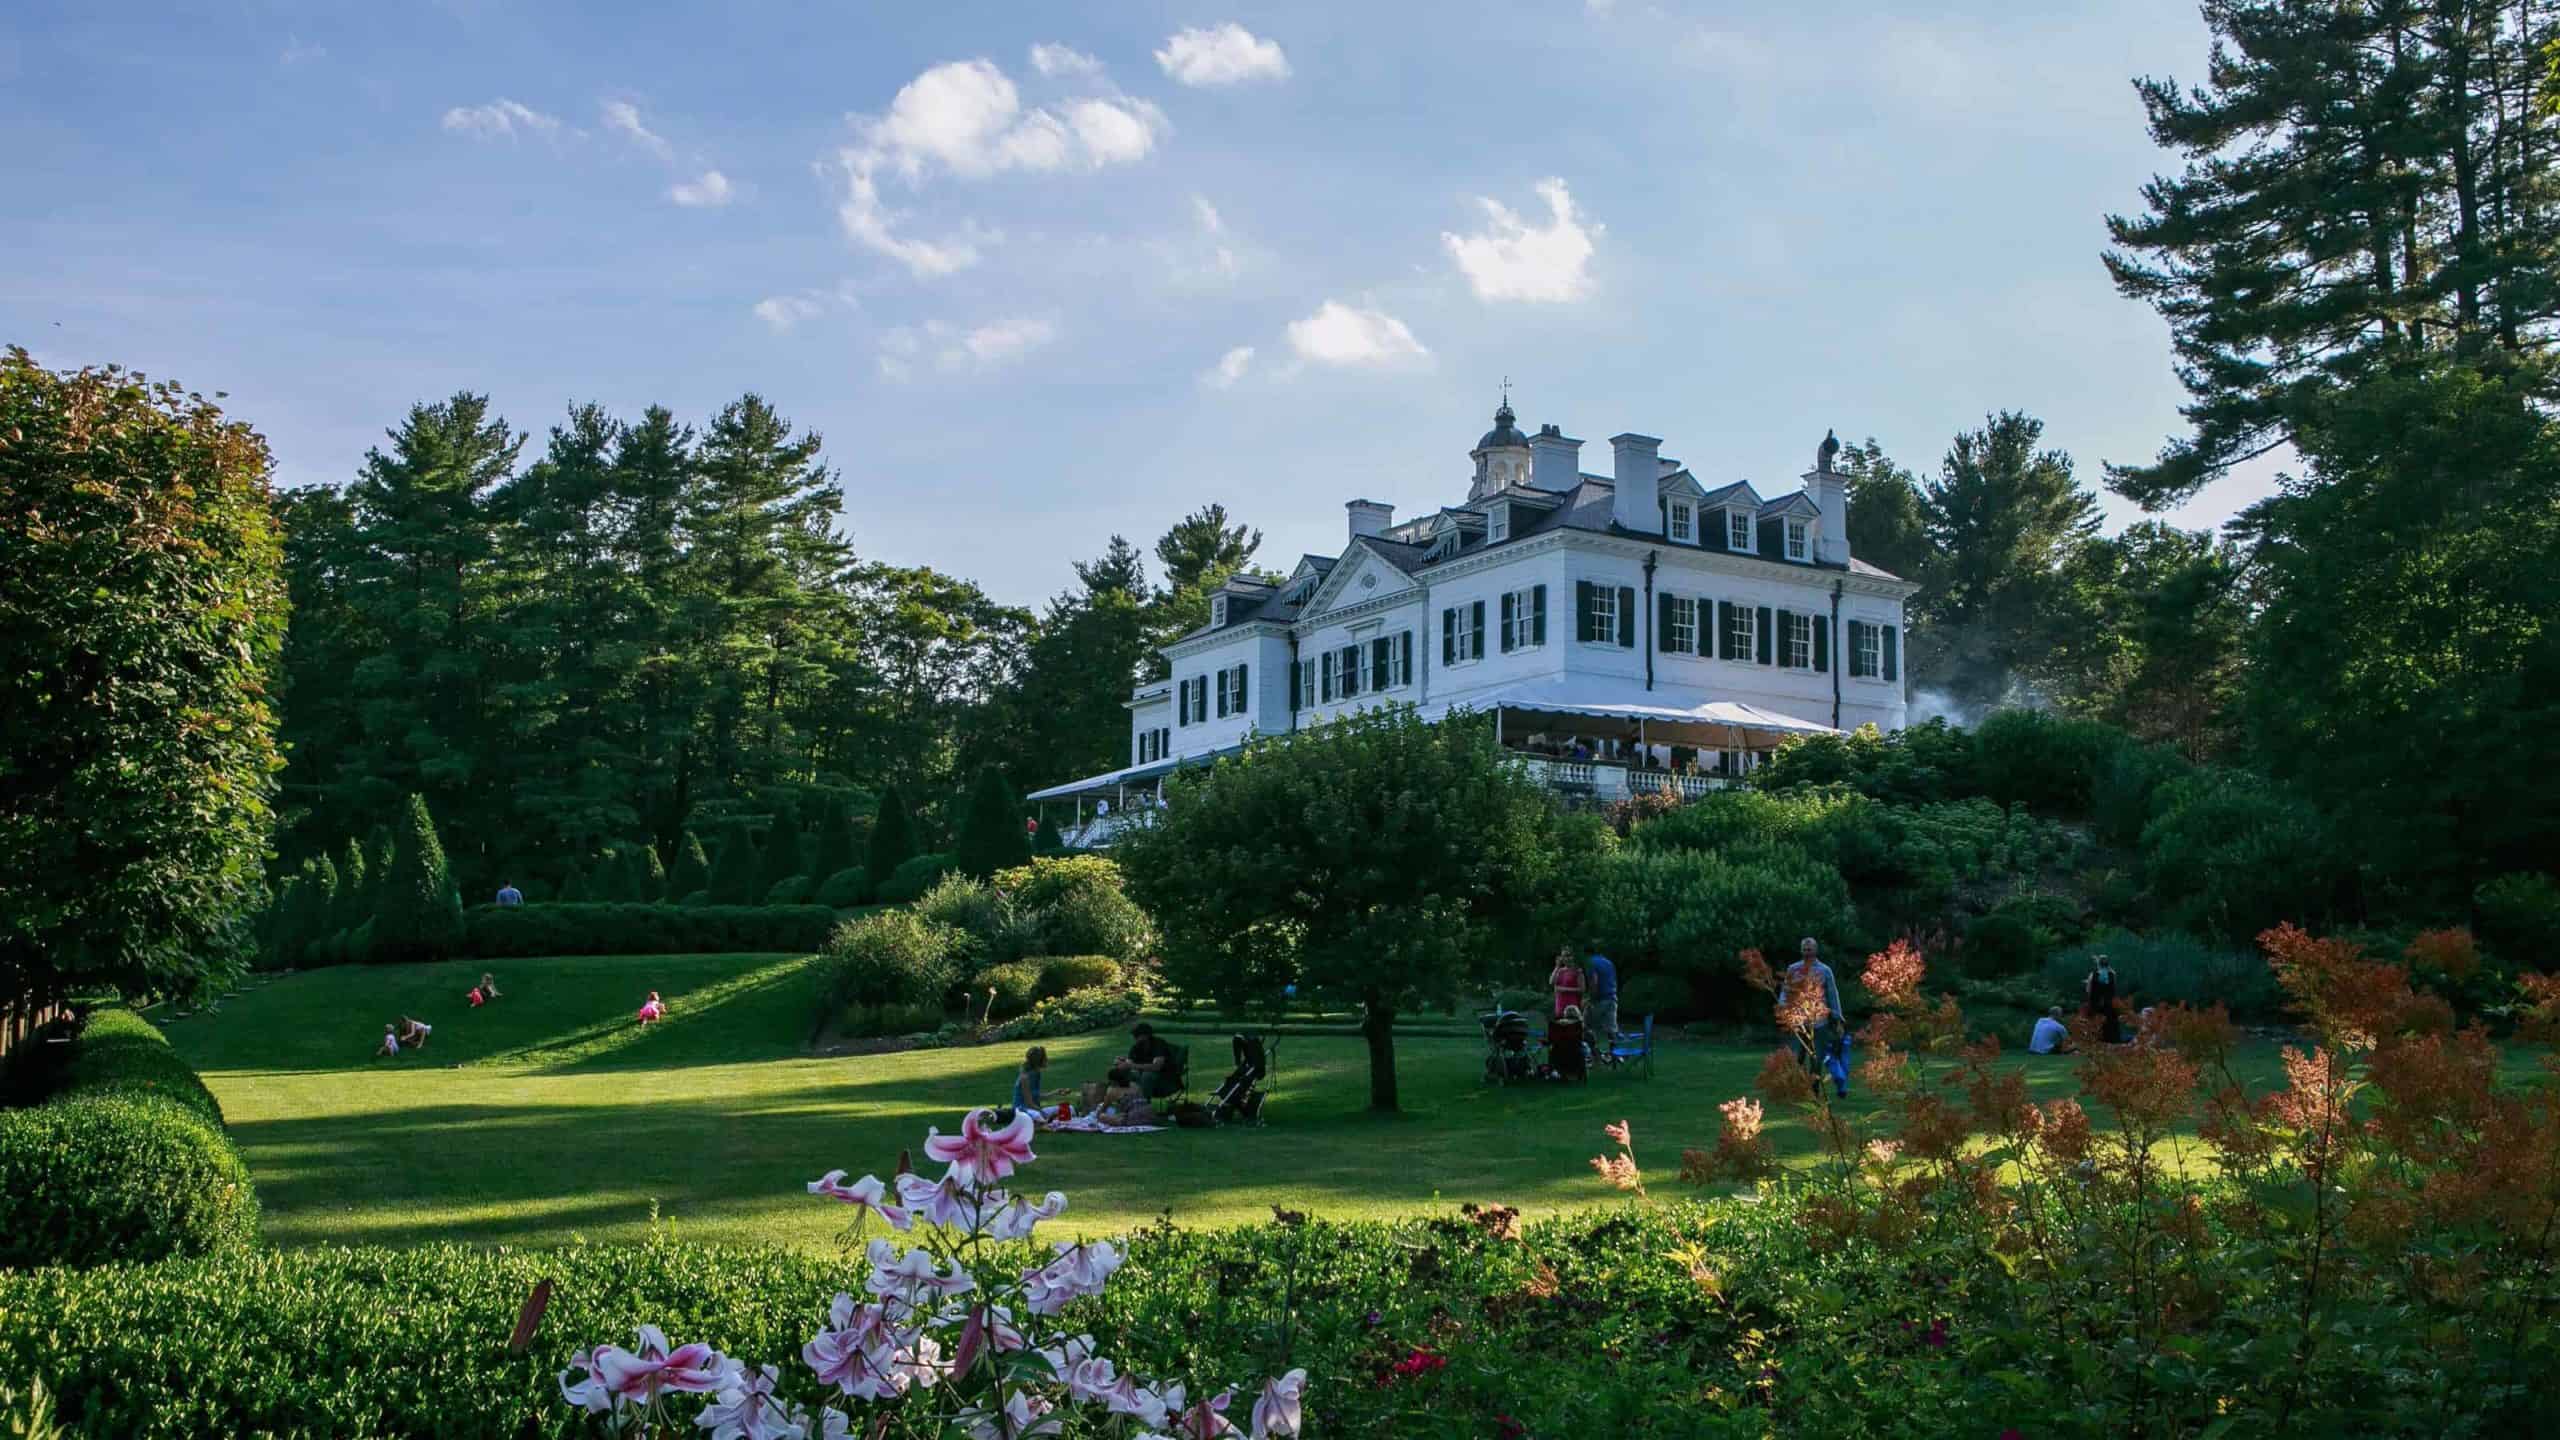 Families picnic on the lawn on a summer evening at the Mount, Edith Wharton's historic house in Lenox.